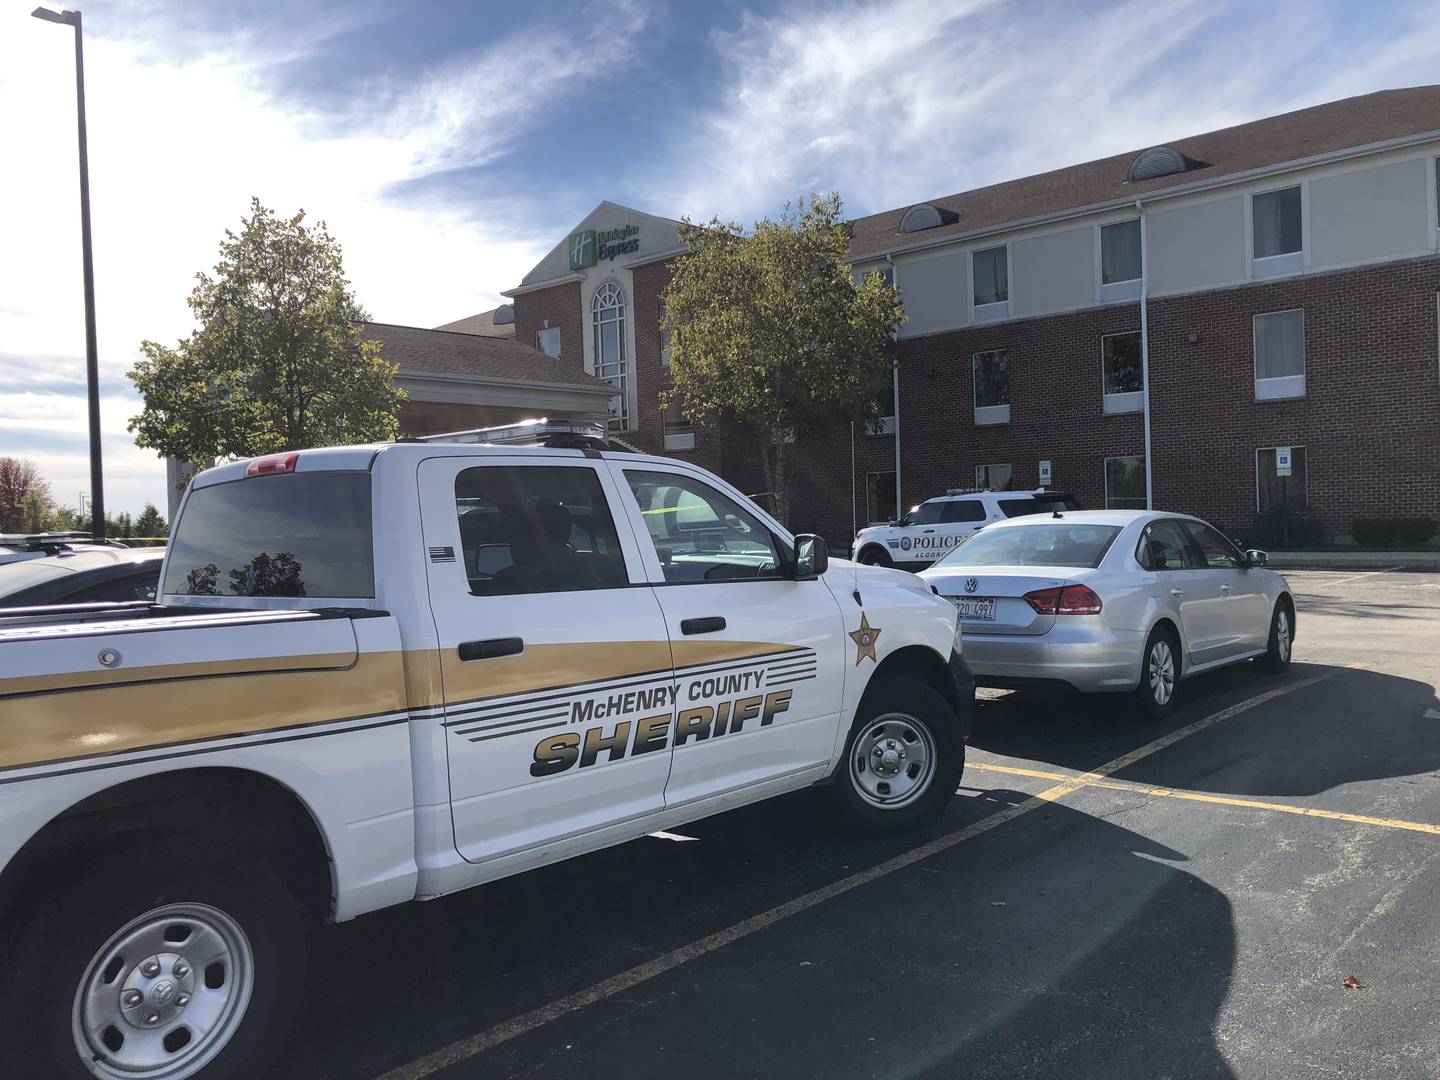 Algonquin police respond Wednesday, Oct. 27, 2021, to the Holiday Inn Express, 2595 Bunker Hill Drive, where a guest was wanted on a felony arrest warrant.